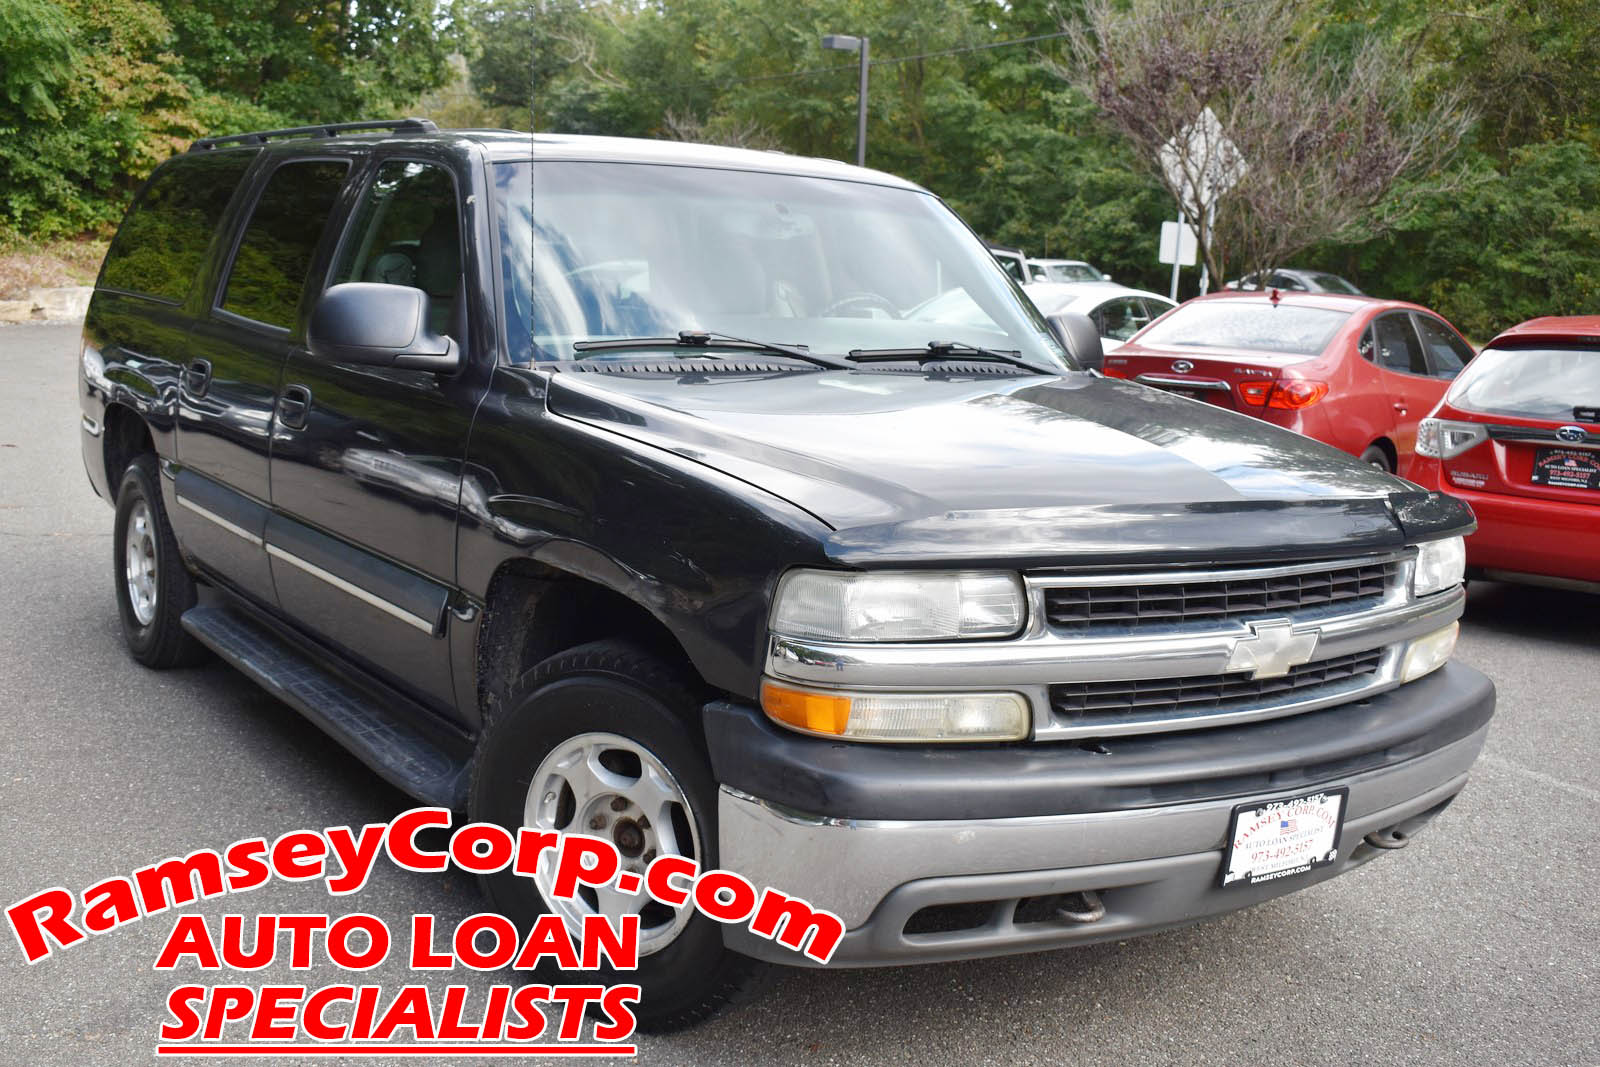 Used 2004 Chevrolet Suburban 1500 For Sale at Ramsey Corp. | VIN:  1GNFK16T14R101018